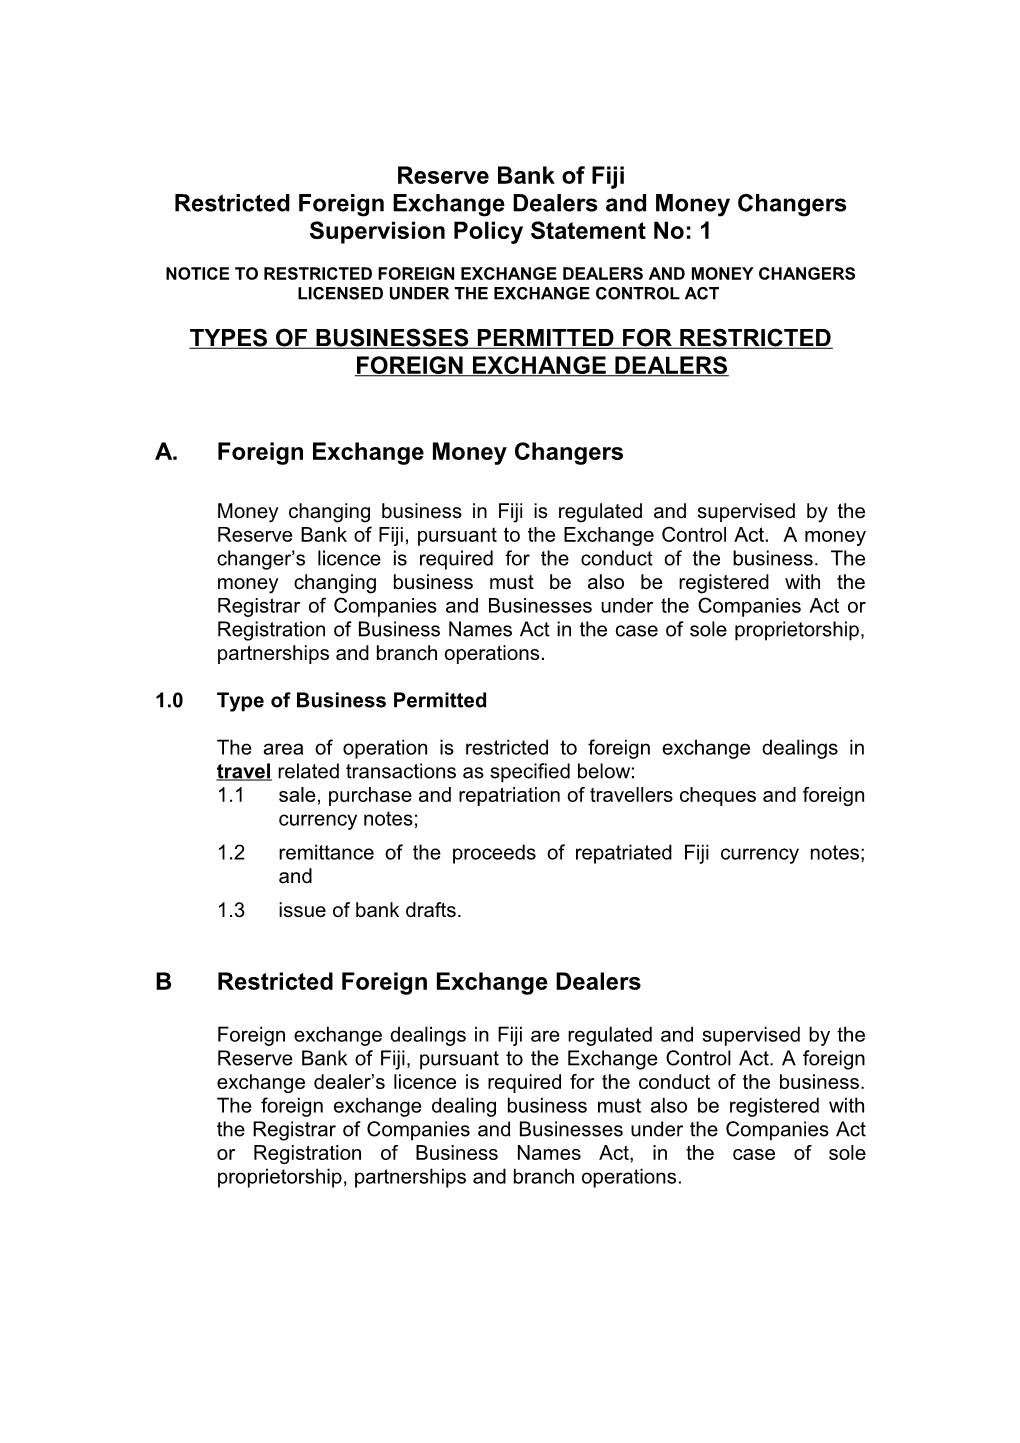 Foreign Exchange Dealers